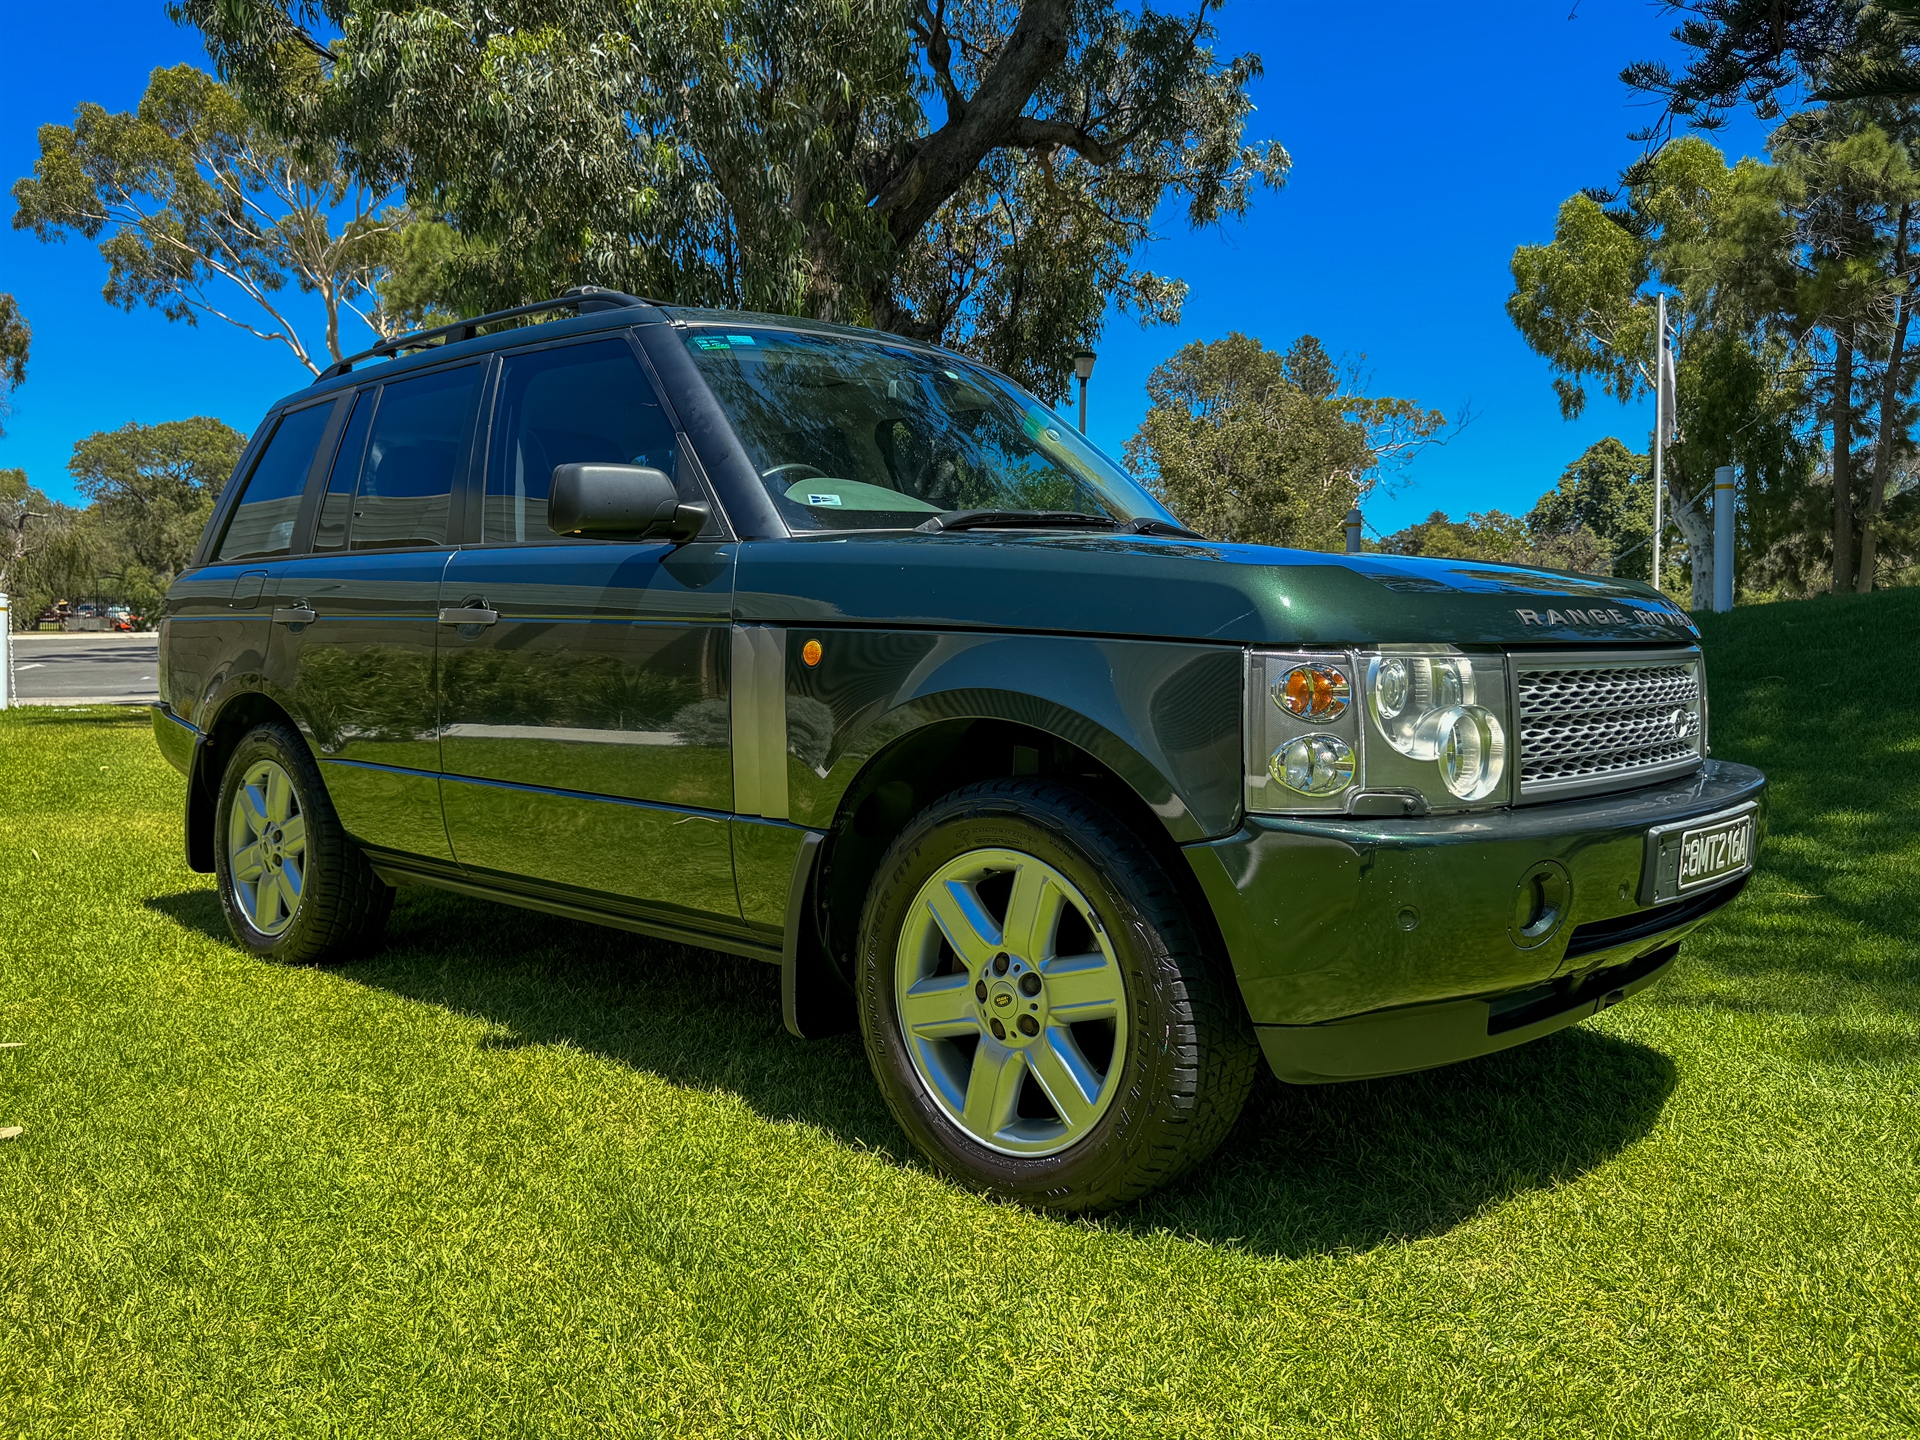 2003 Range Rover Vogue (L322) for sale by classified listing privately in  Perth